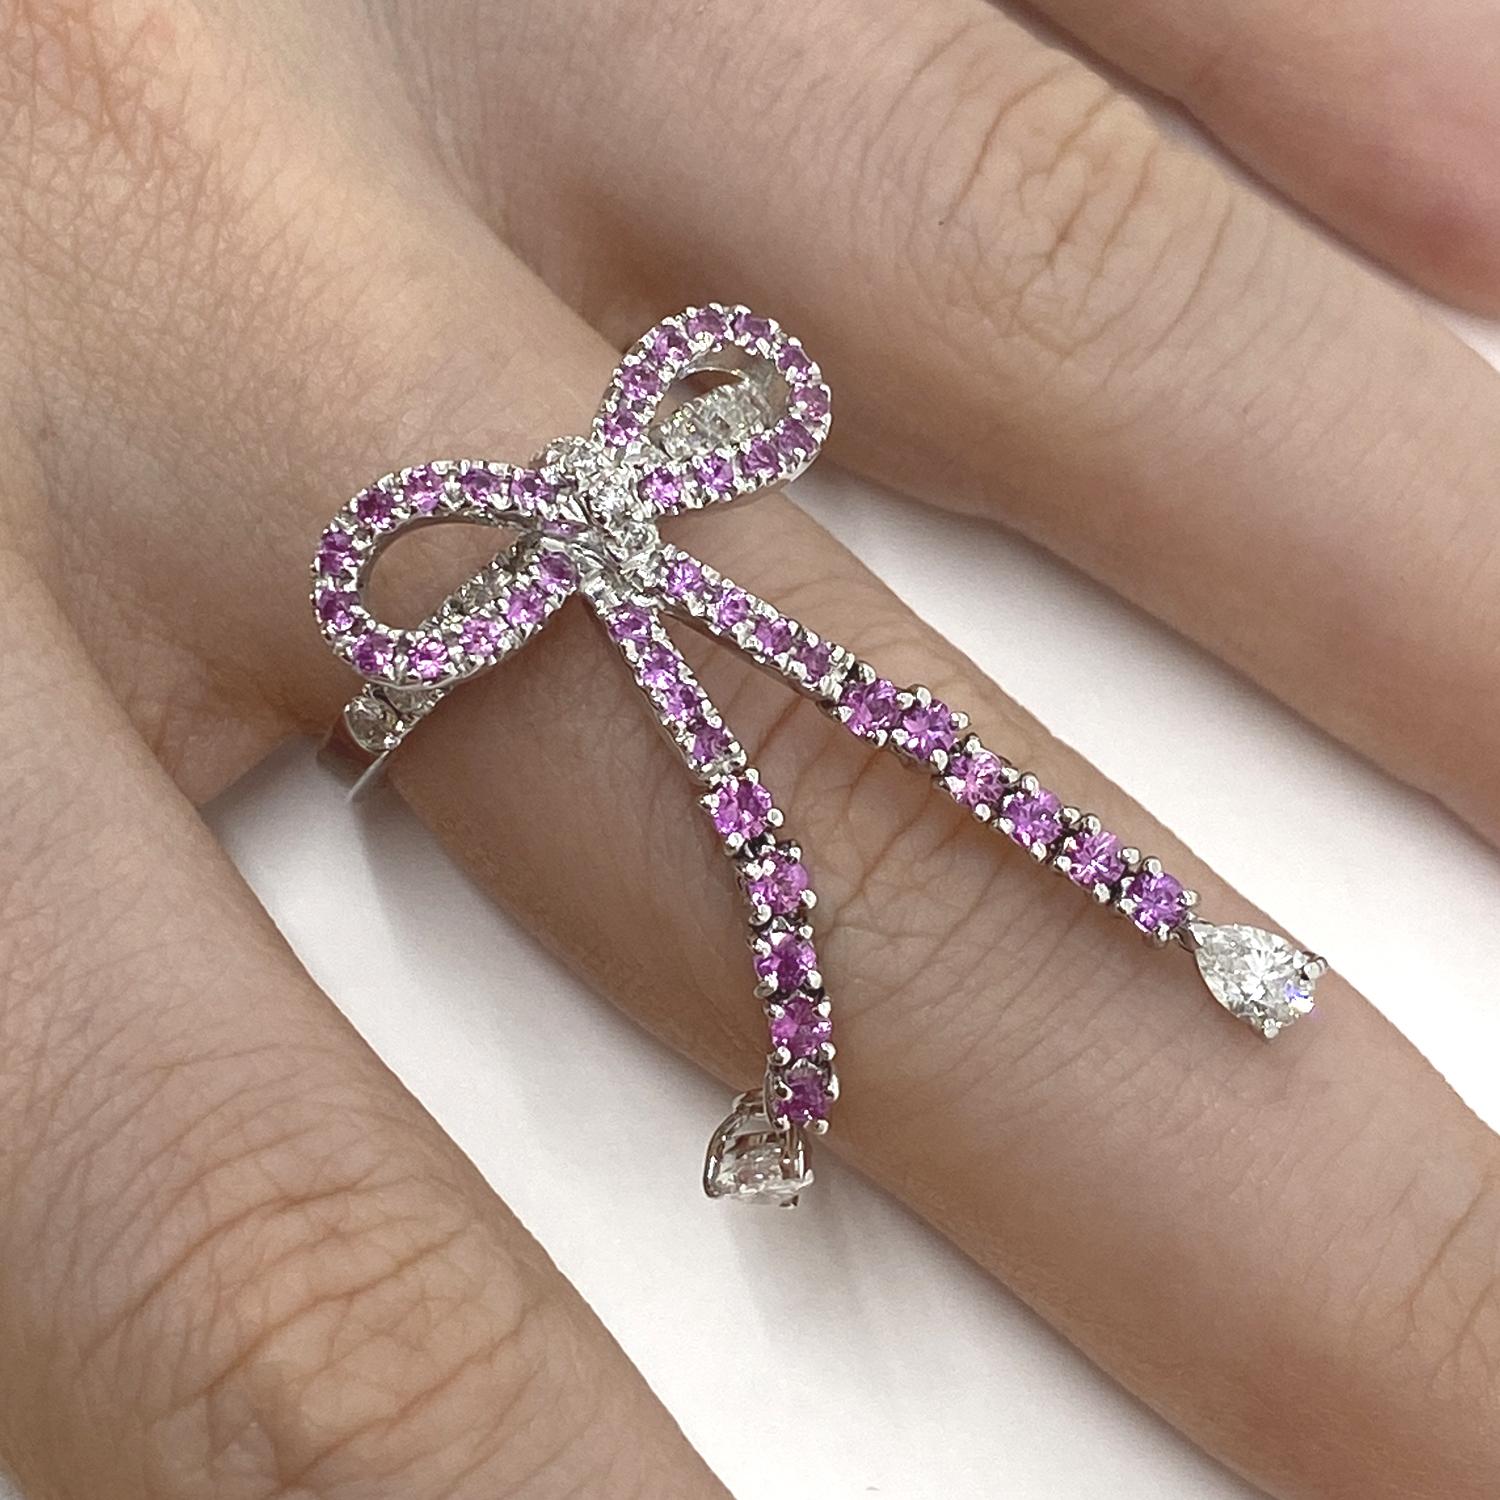 Brilliant Cut 18kt Staurino Ribbon Bow Ring Pink Sapphires 0.92 Carat White Diamonds 0.97ct For Sale